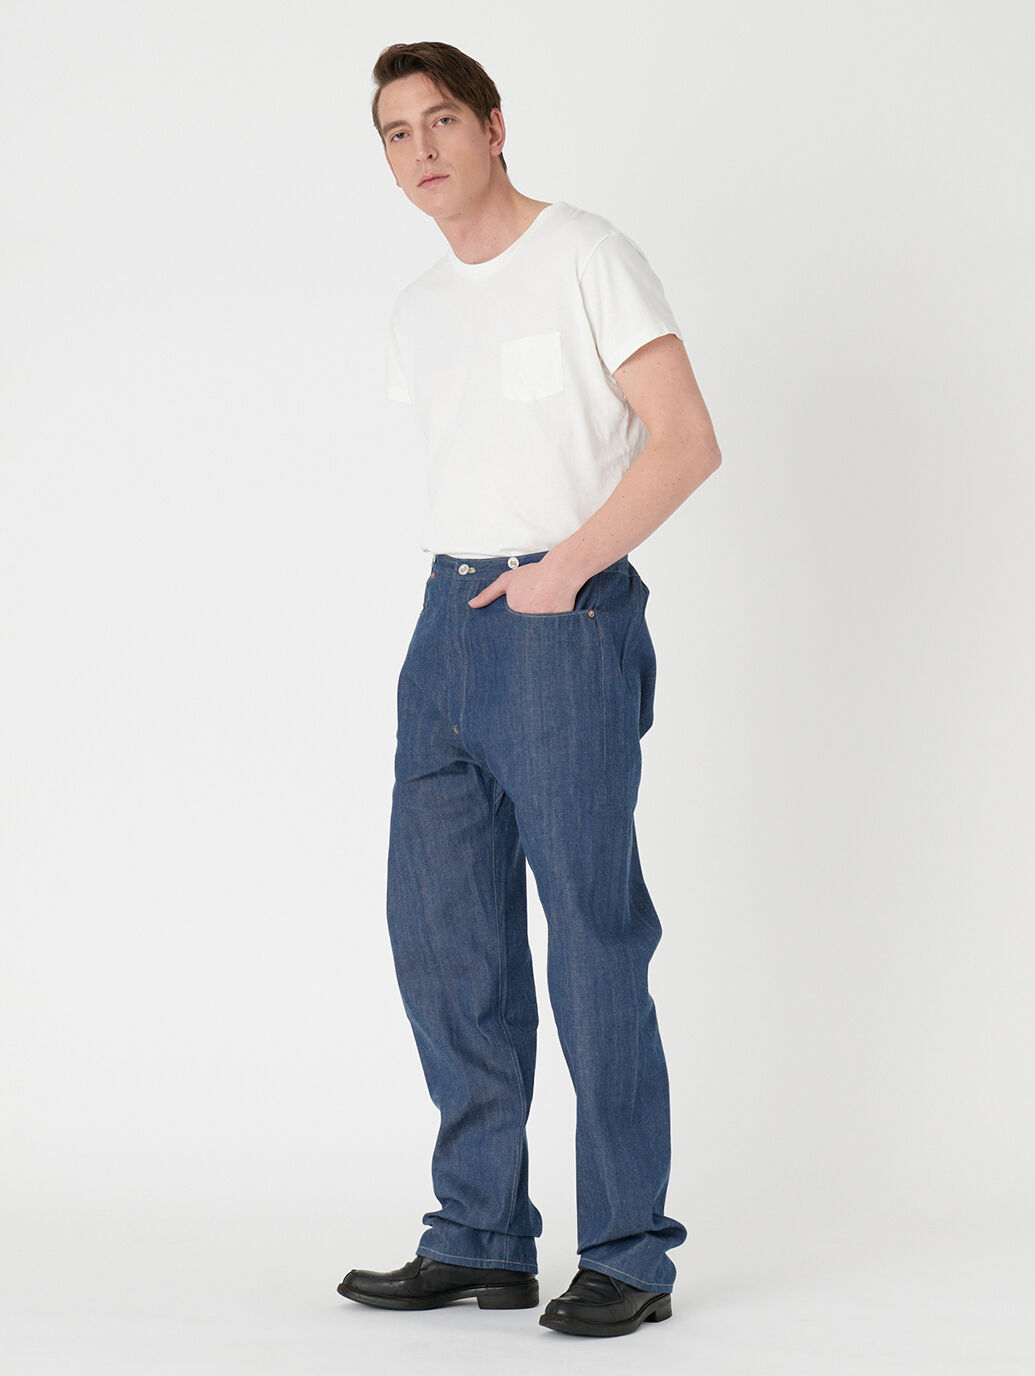 LIMITED EDITION LEVI'S® VINTAGE CLOTHING1873 XX Waist Overall